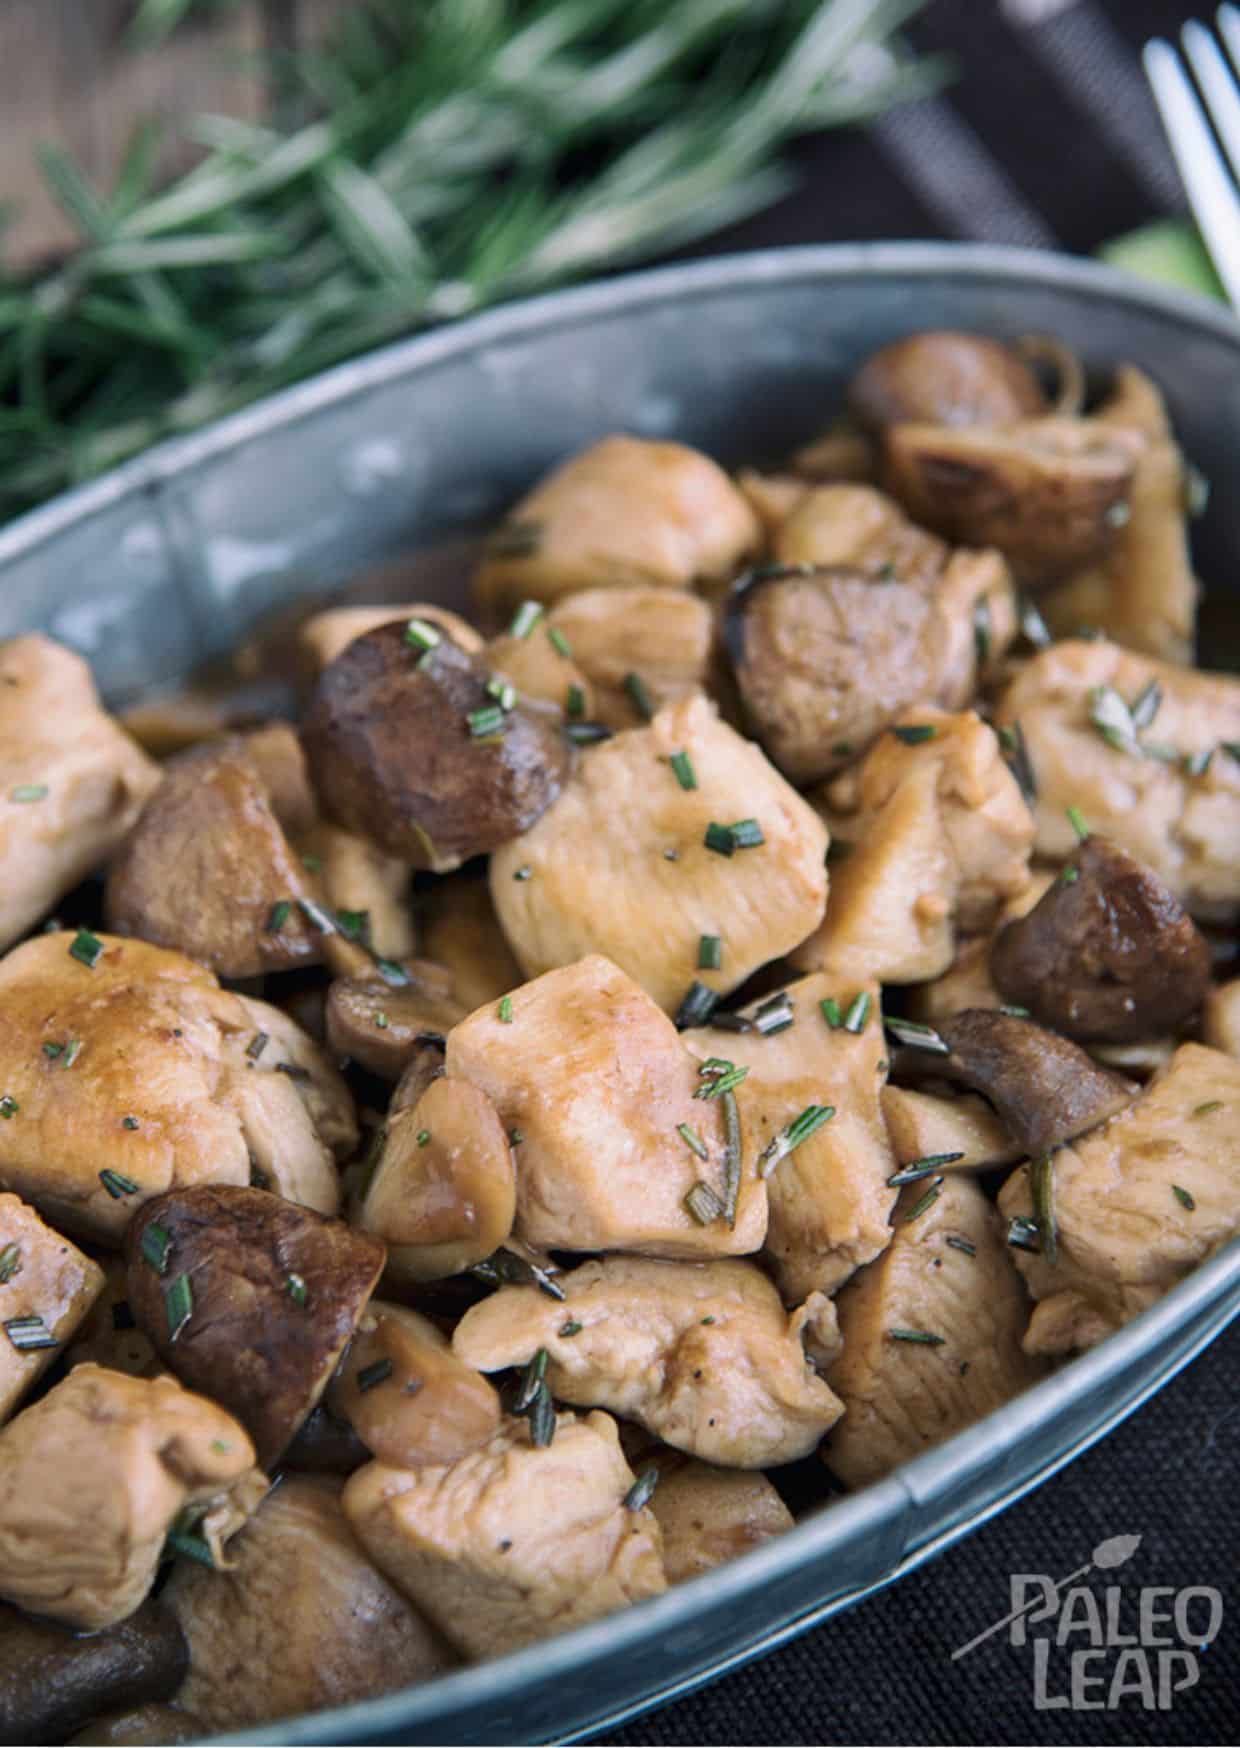 Rosemary Chicken With Mushroom Sauce in a baking tray.